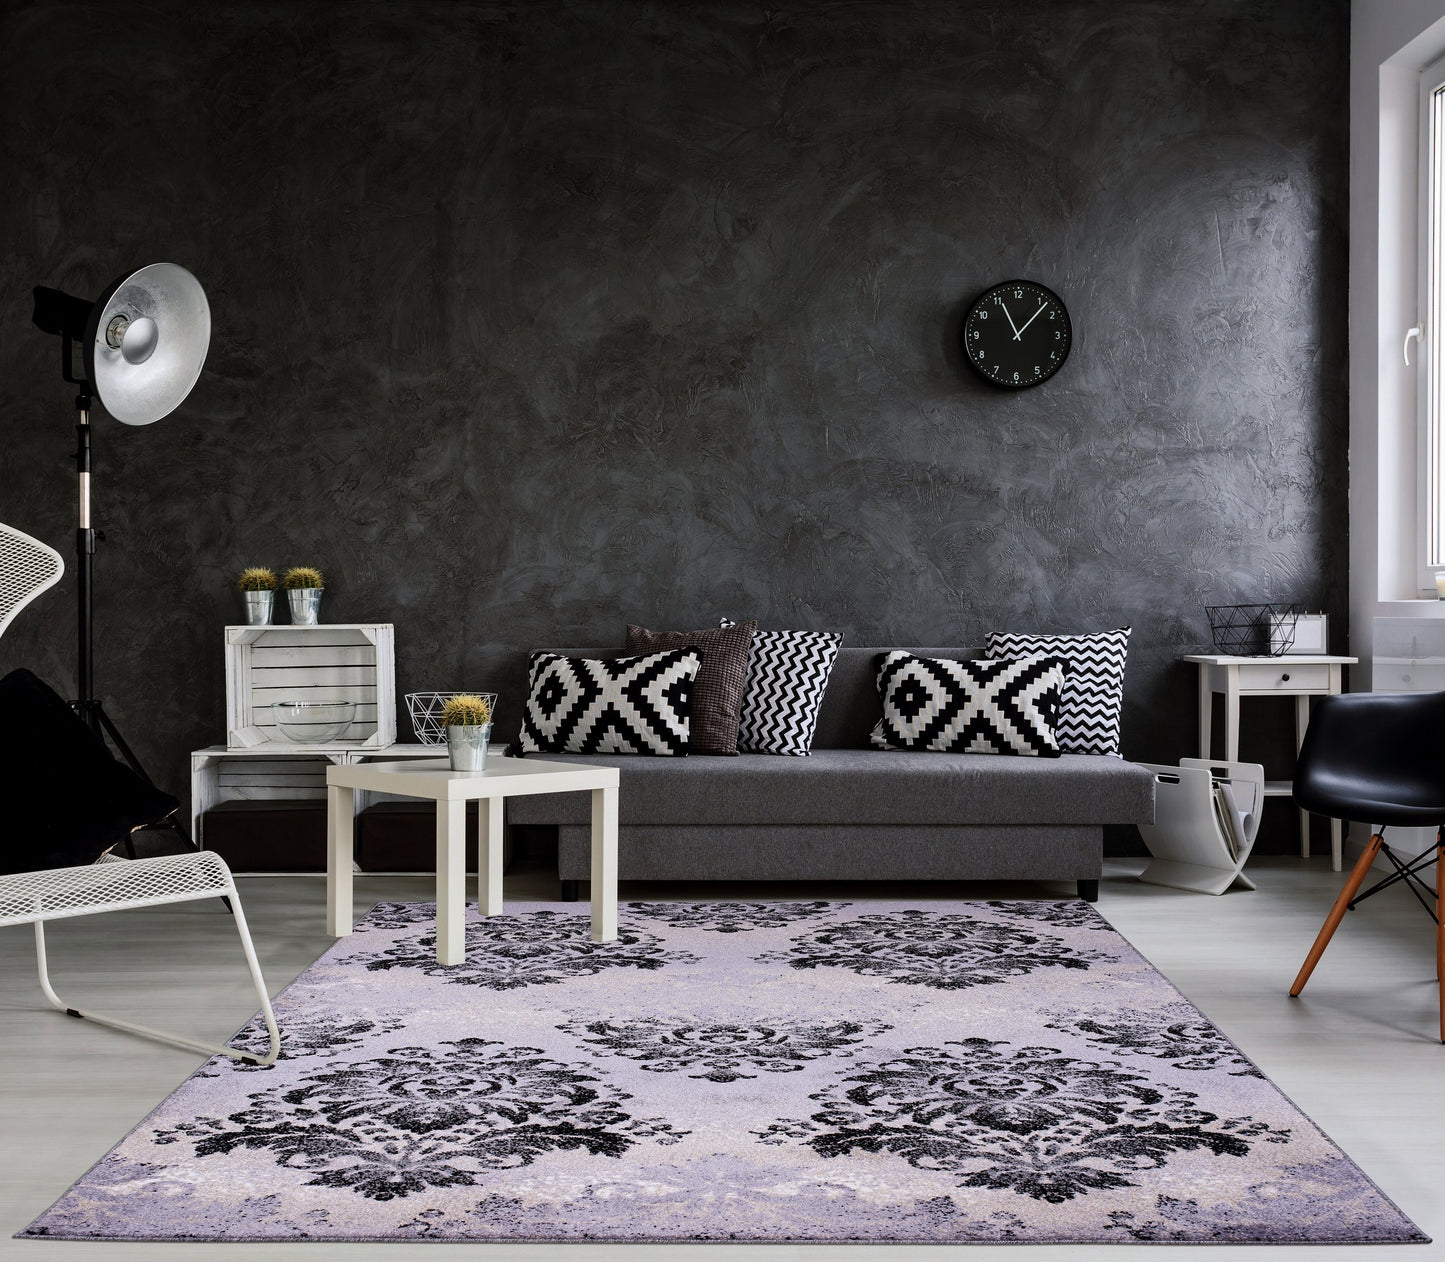 persian black grey area rug 4x6, 4x5 ft Small Carpet, Home Office, Living Room, Bedroom